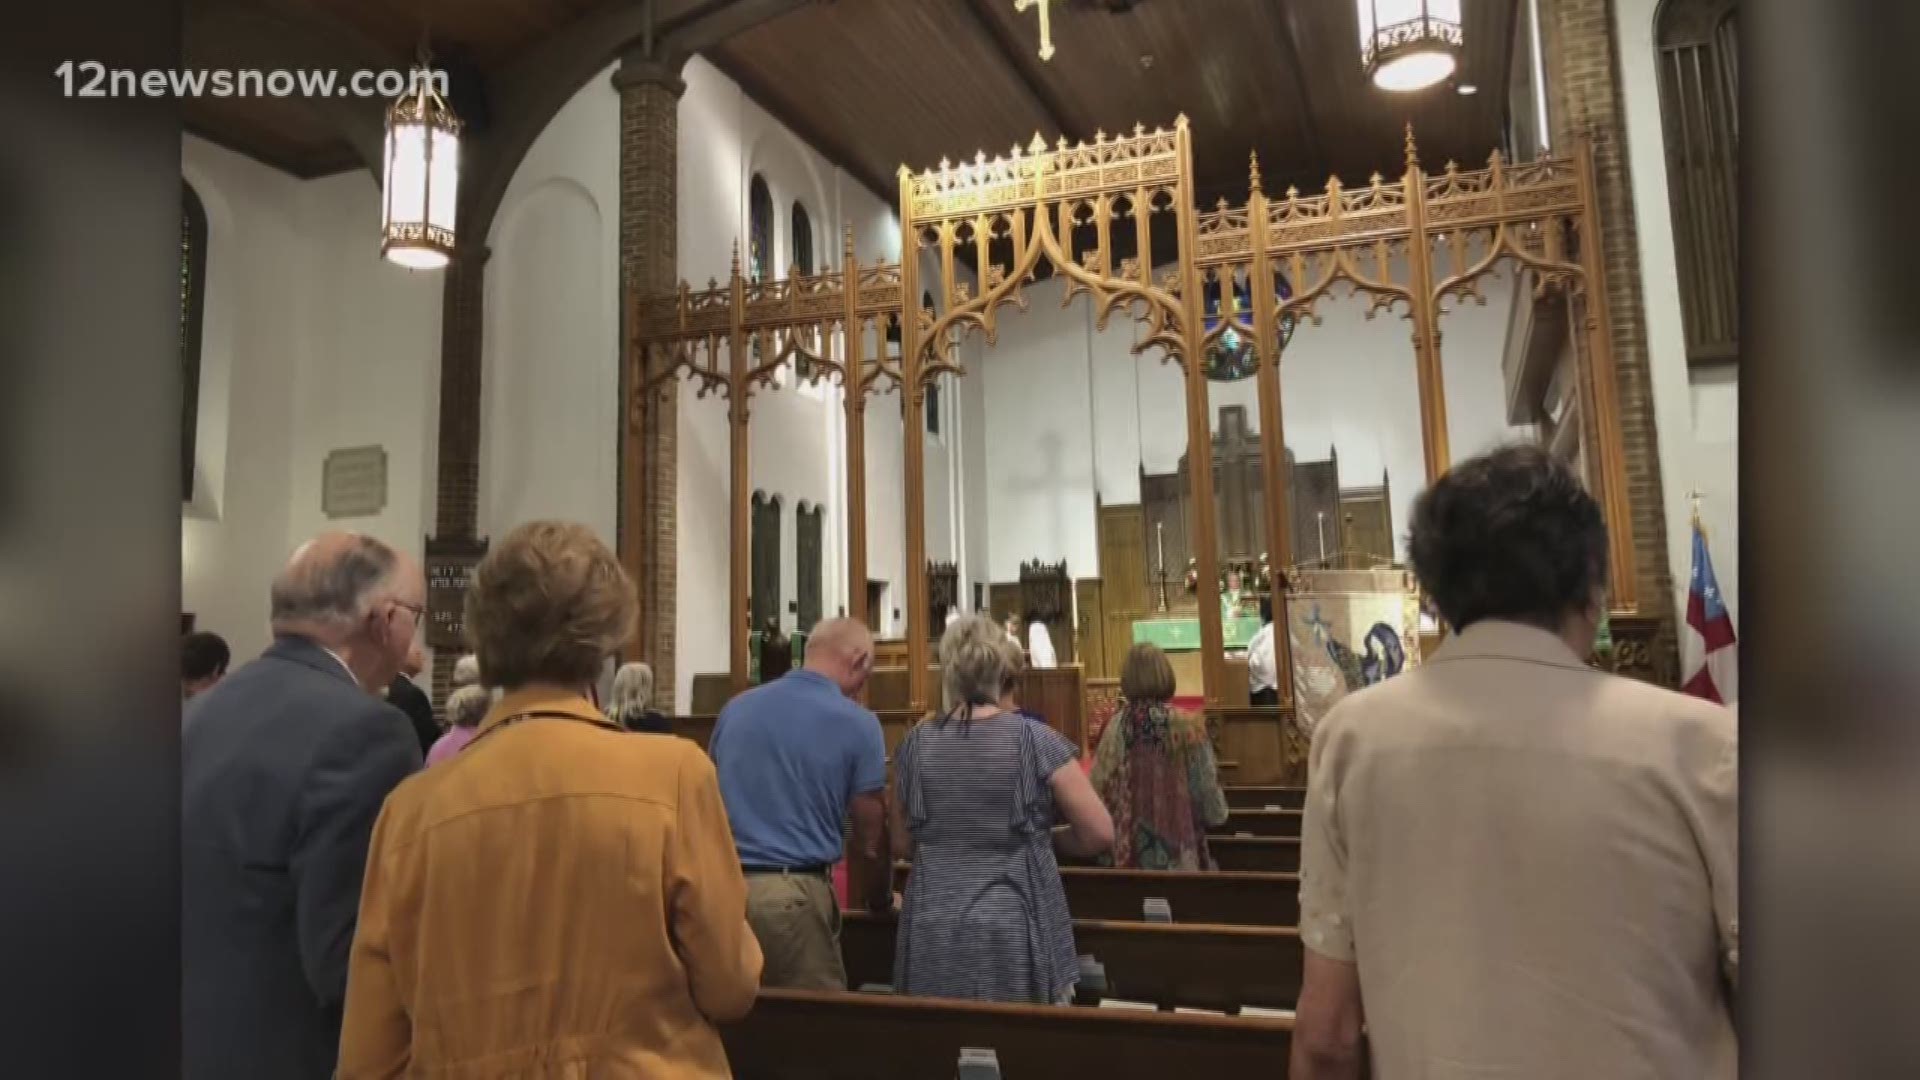 This Sunday you have the opportunity to experience a unique musical tradition, right in our backyard. St. Mark's Episcopal Church will be hosting Choral Evensong.